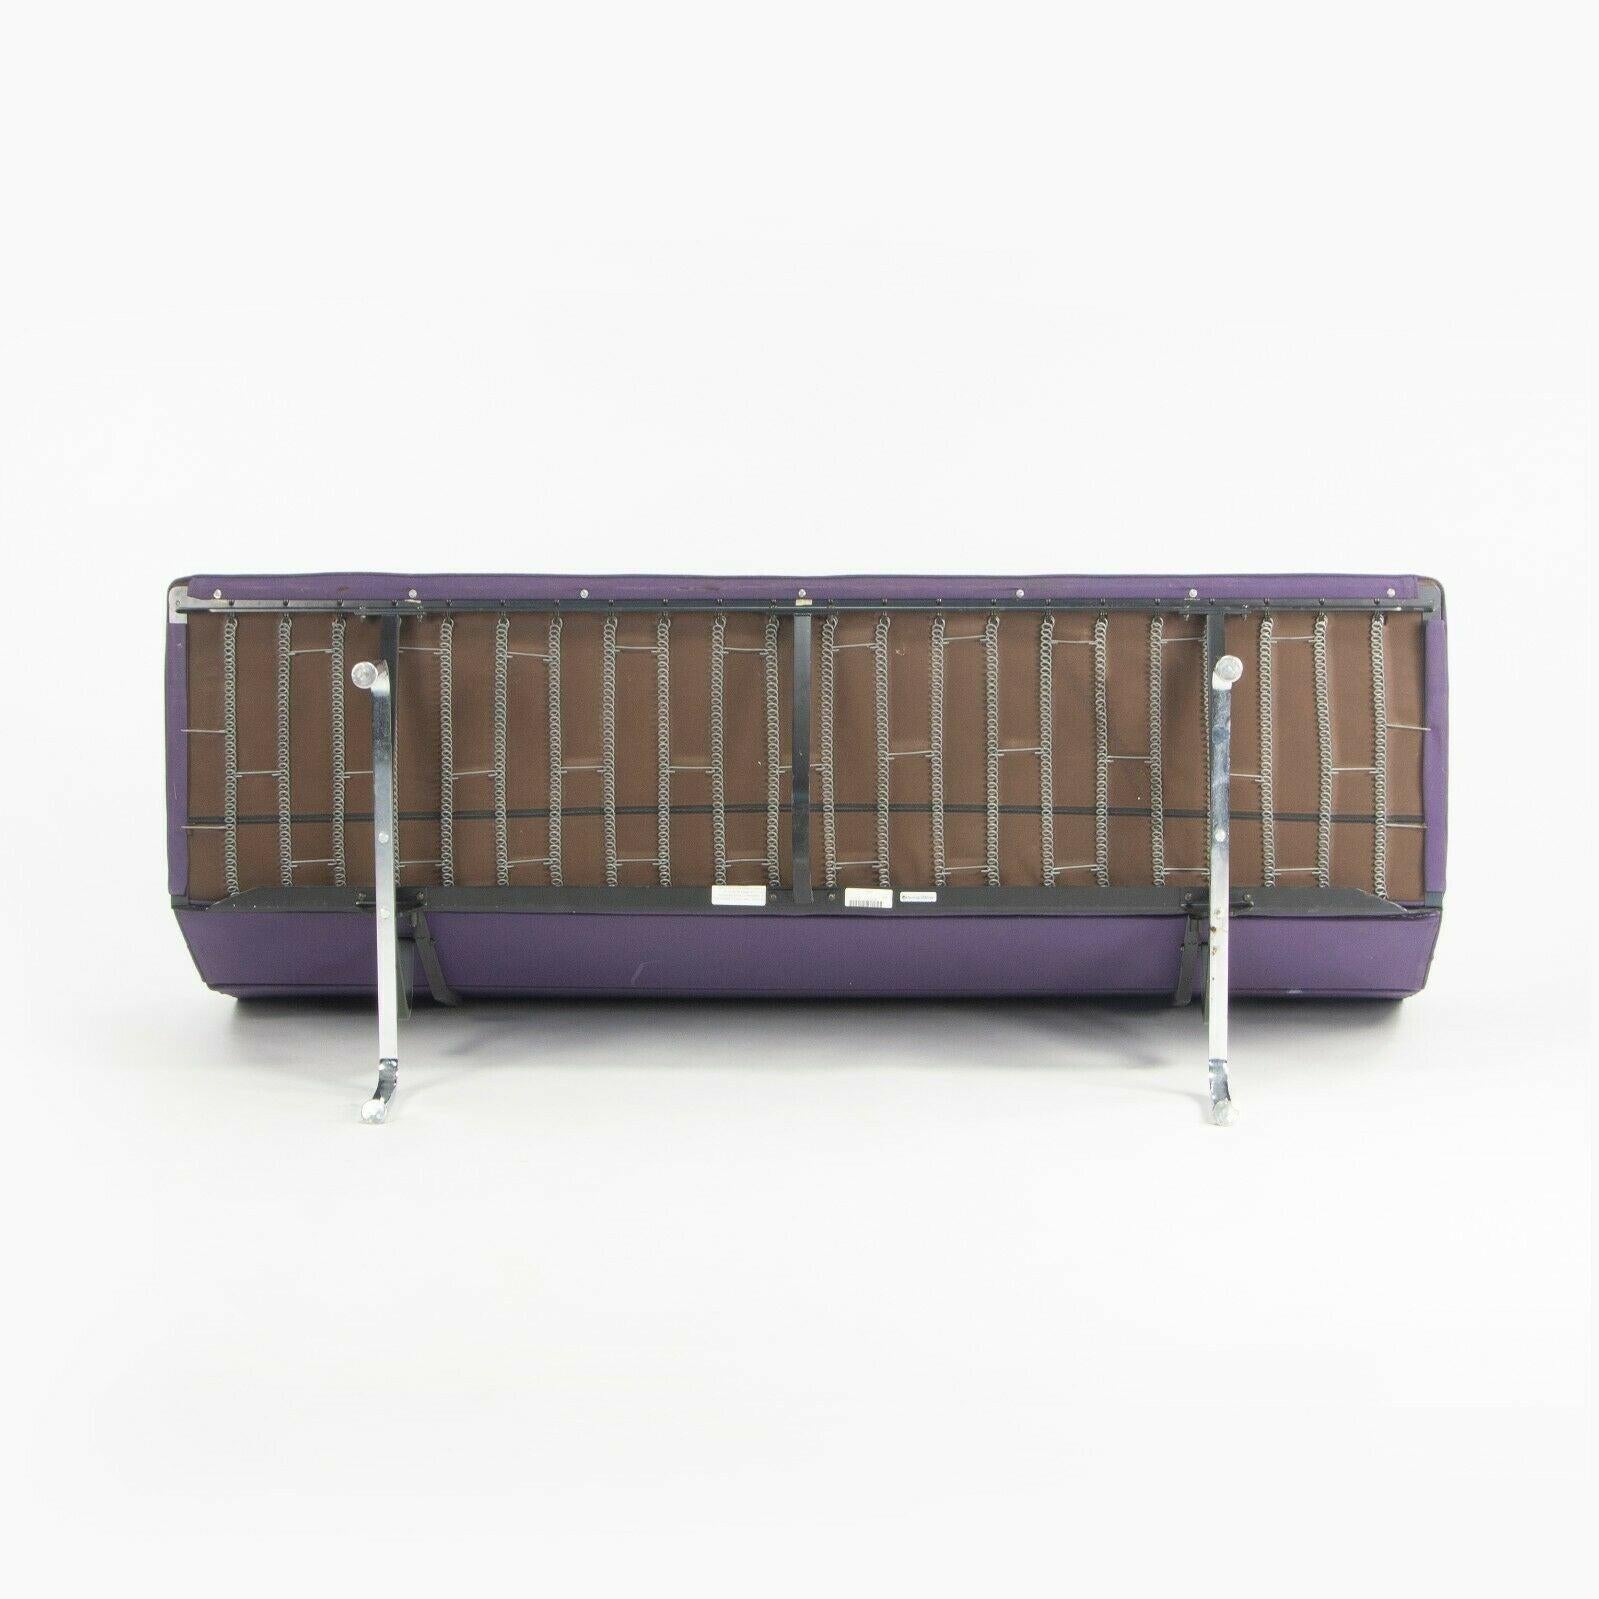 American 2006 Herman Miller Ray and Charles Eames Sofa Compact Purple Fabric Upholstery For Sale